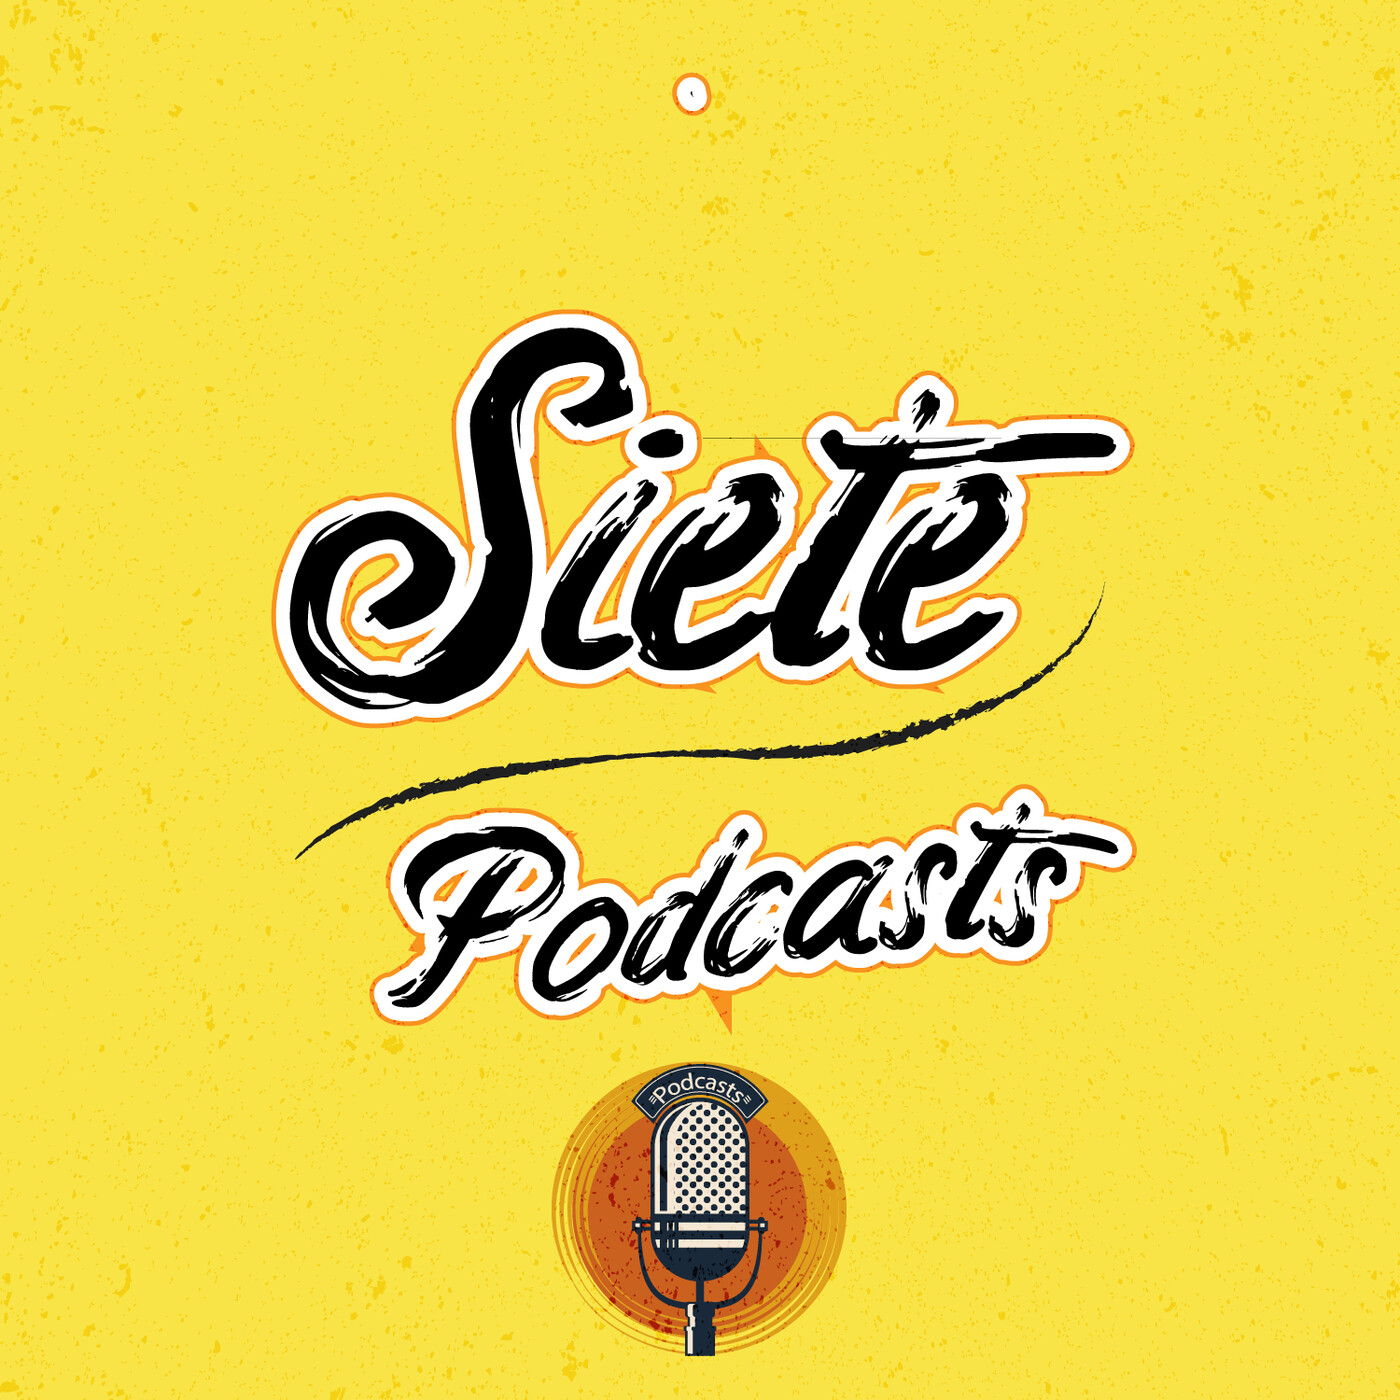 Sietepodcasts